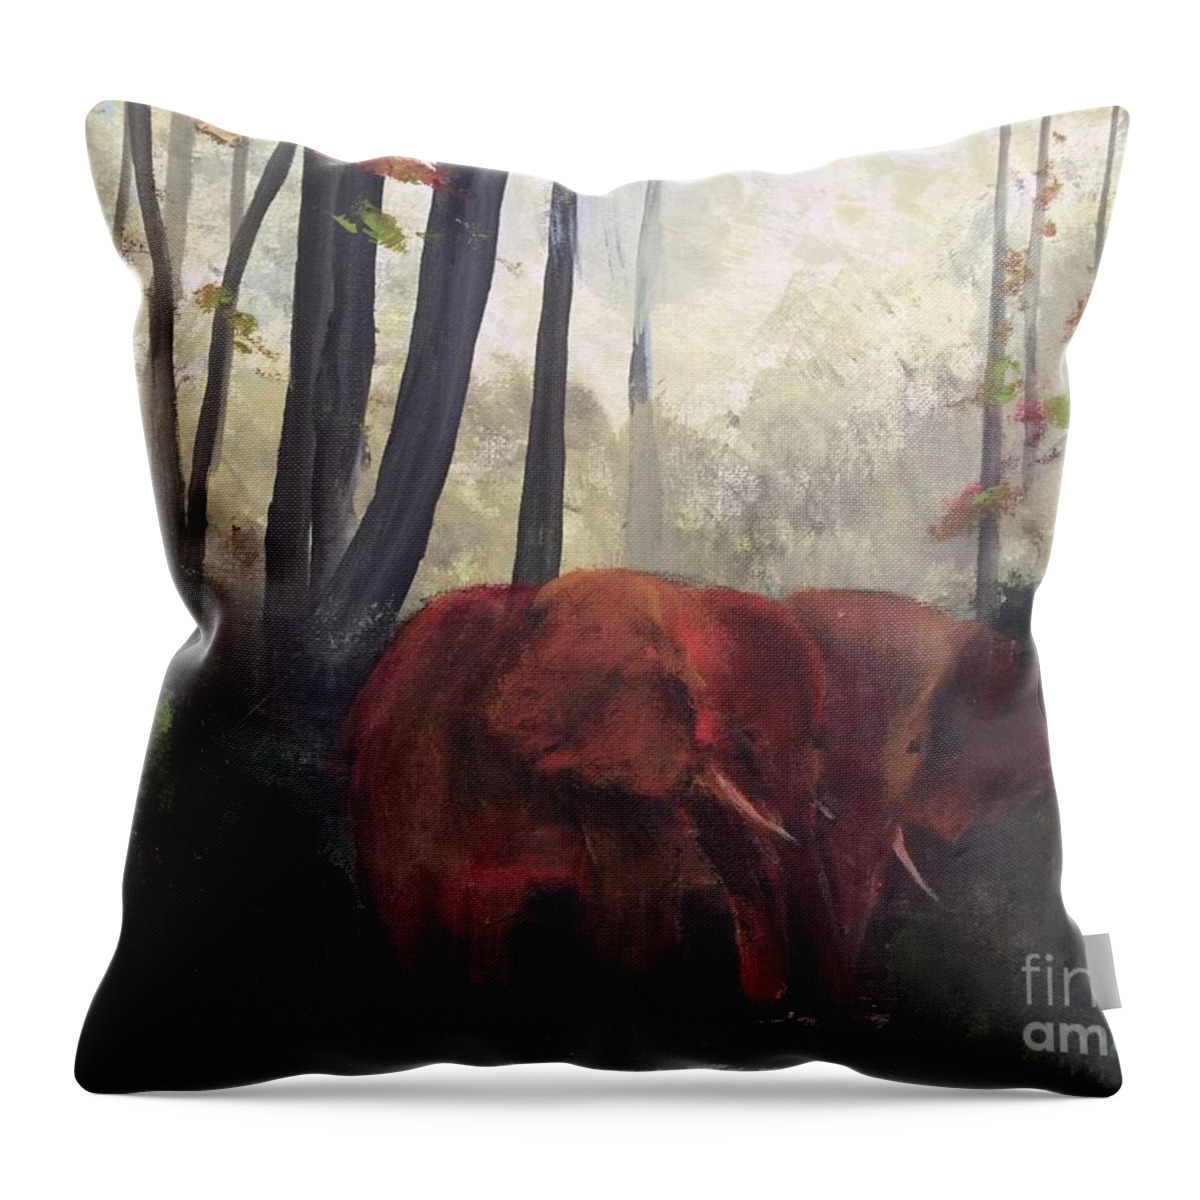 Elephants Throw Pillow featuring the painting Elephants by Trilby Cole